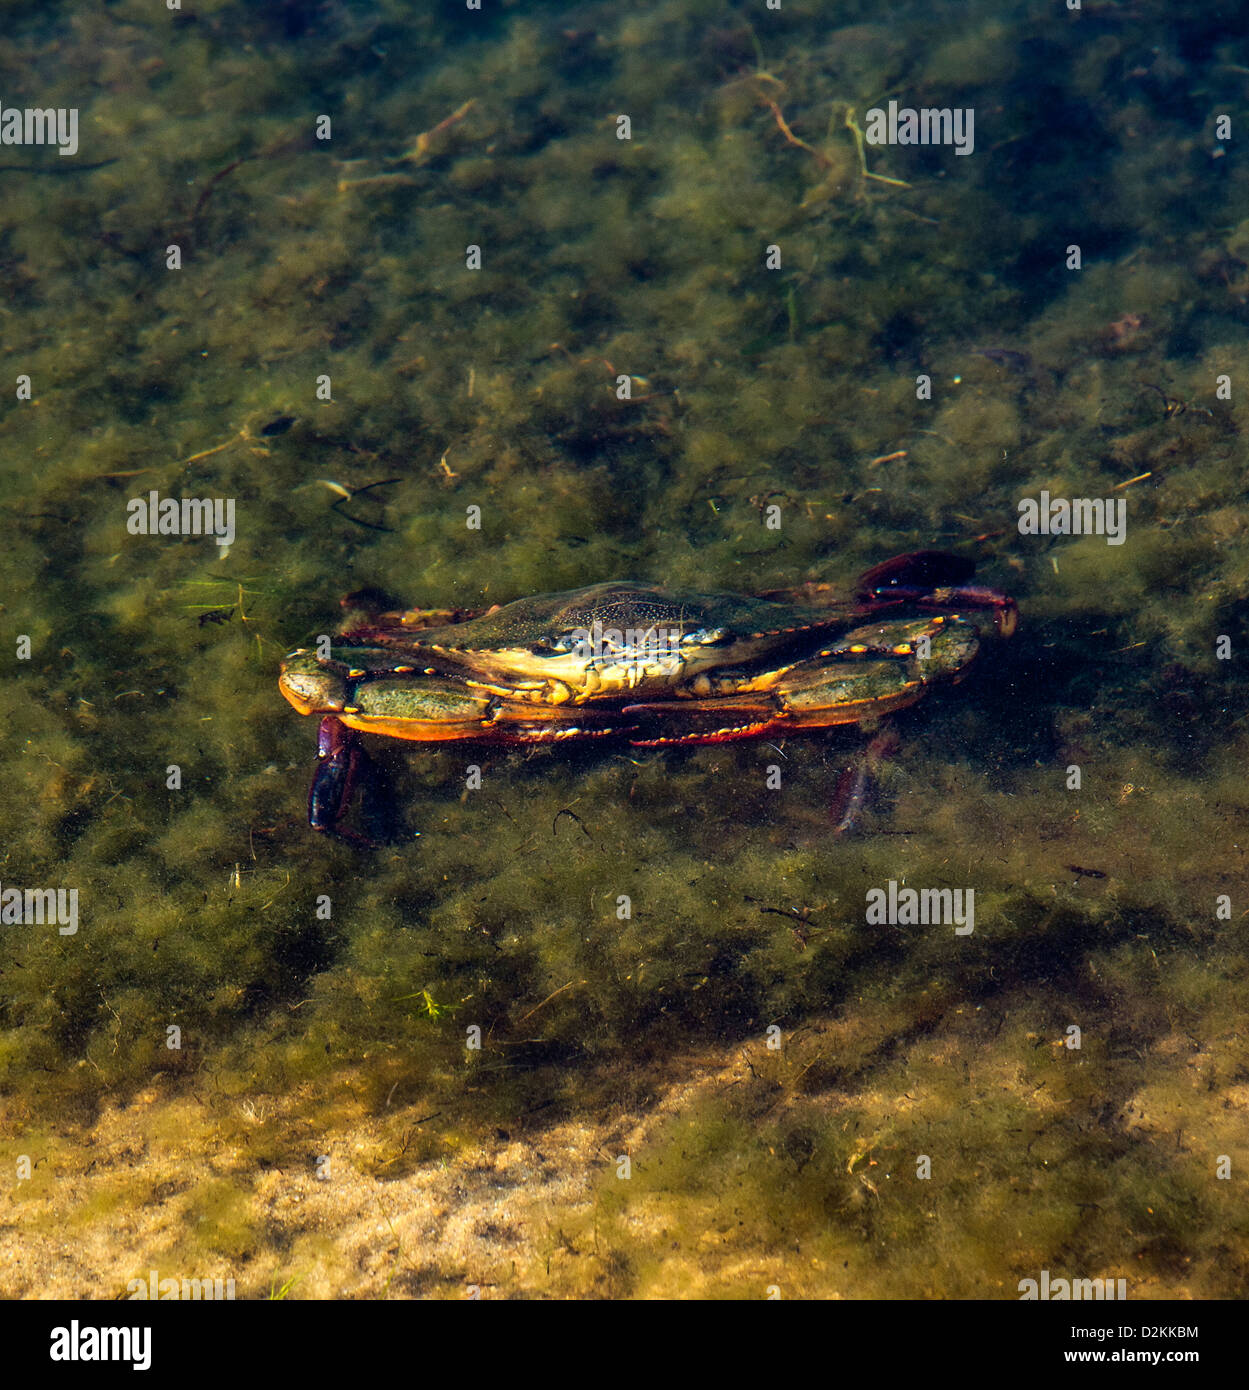 Live crab in shallow water. Stock Photo